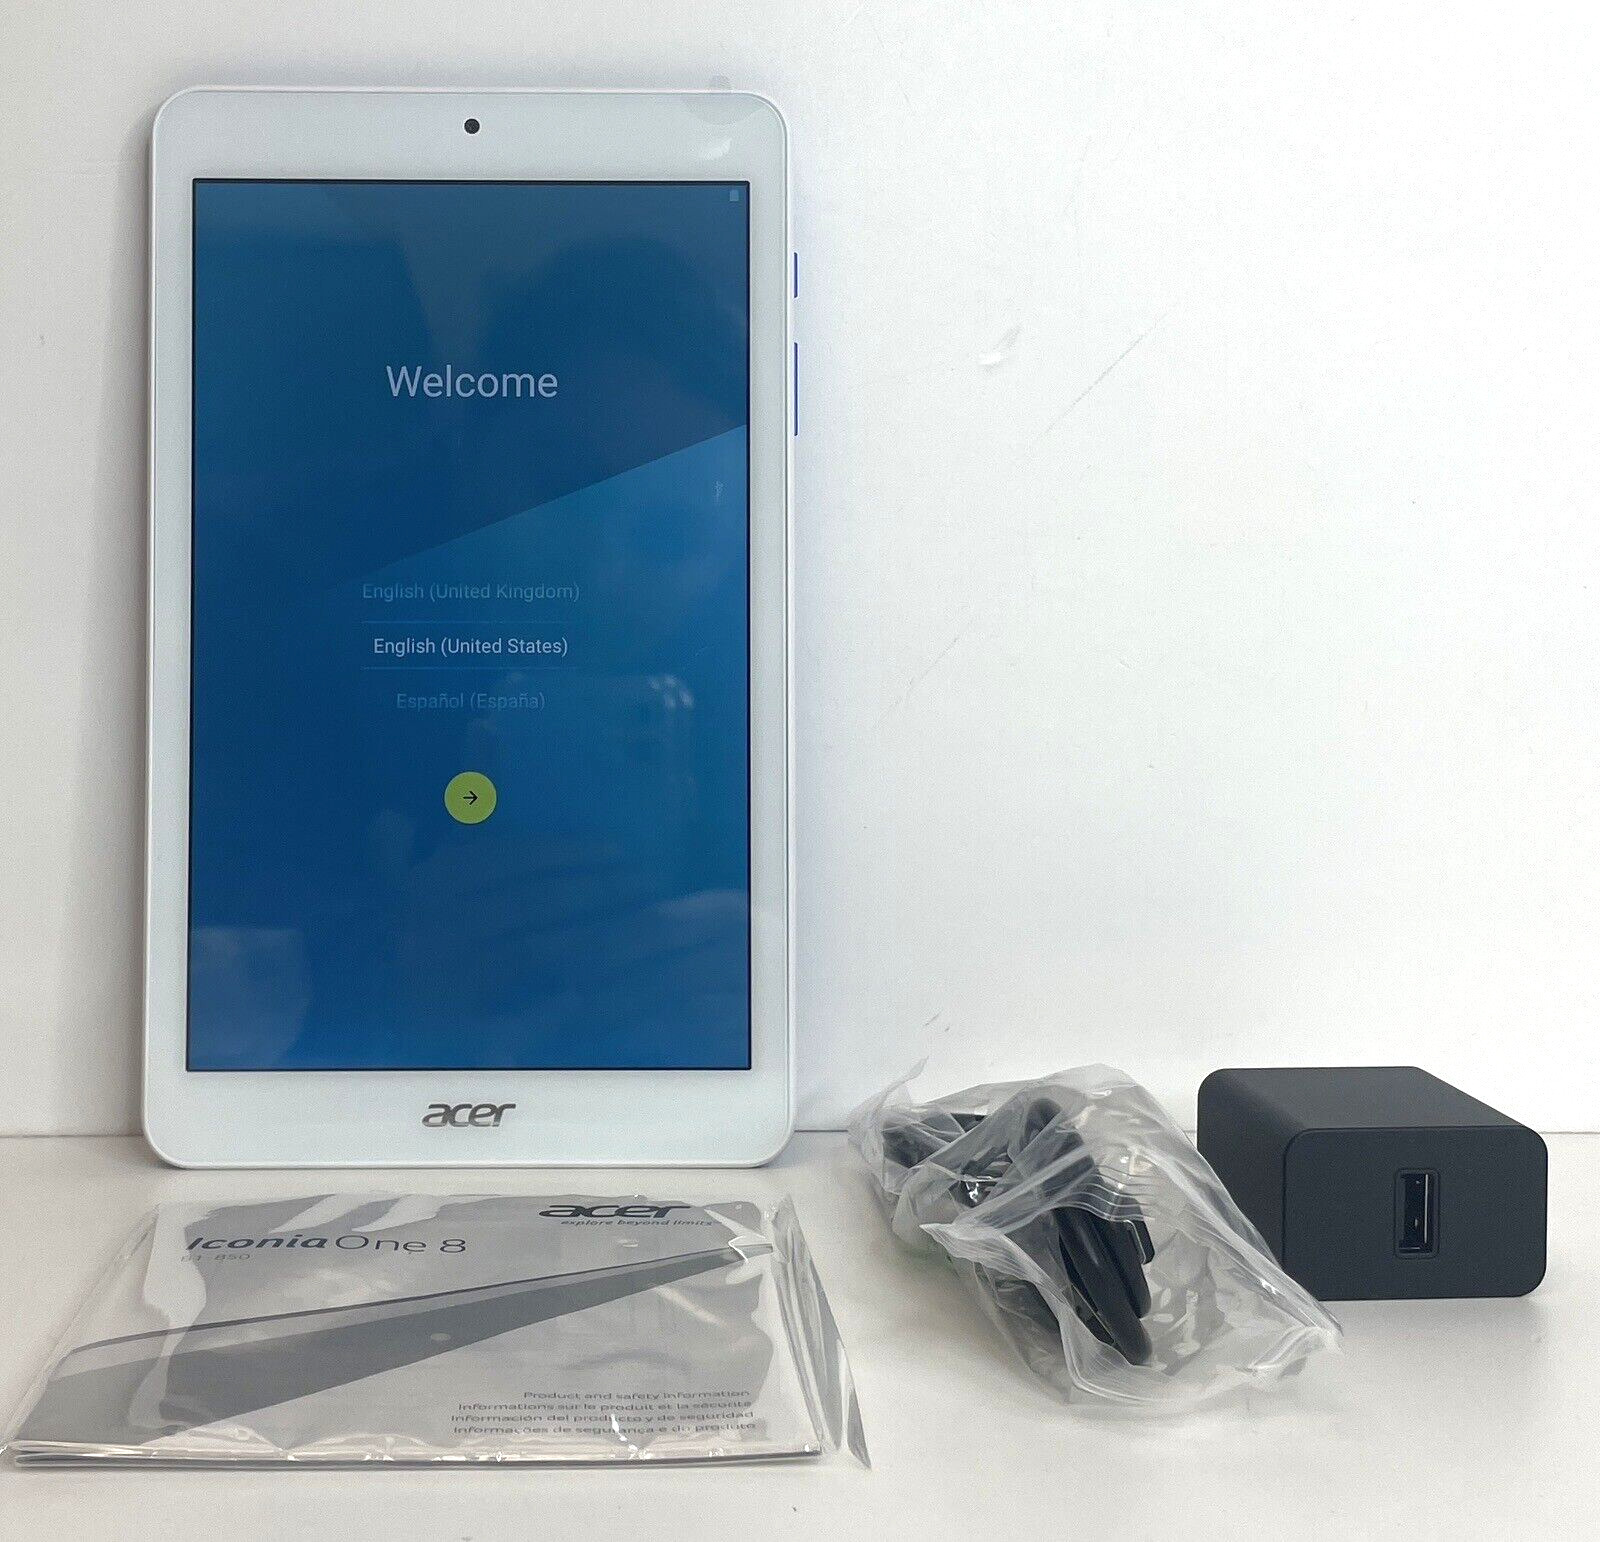 Acer Iconia One 8 B1-850 - White/Blue Tablet